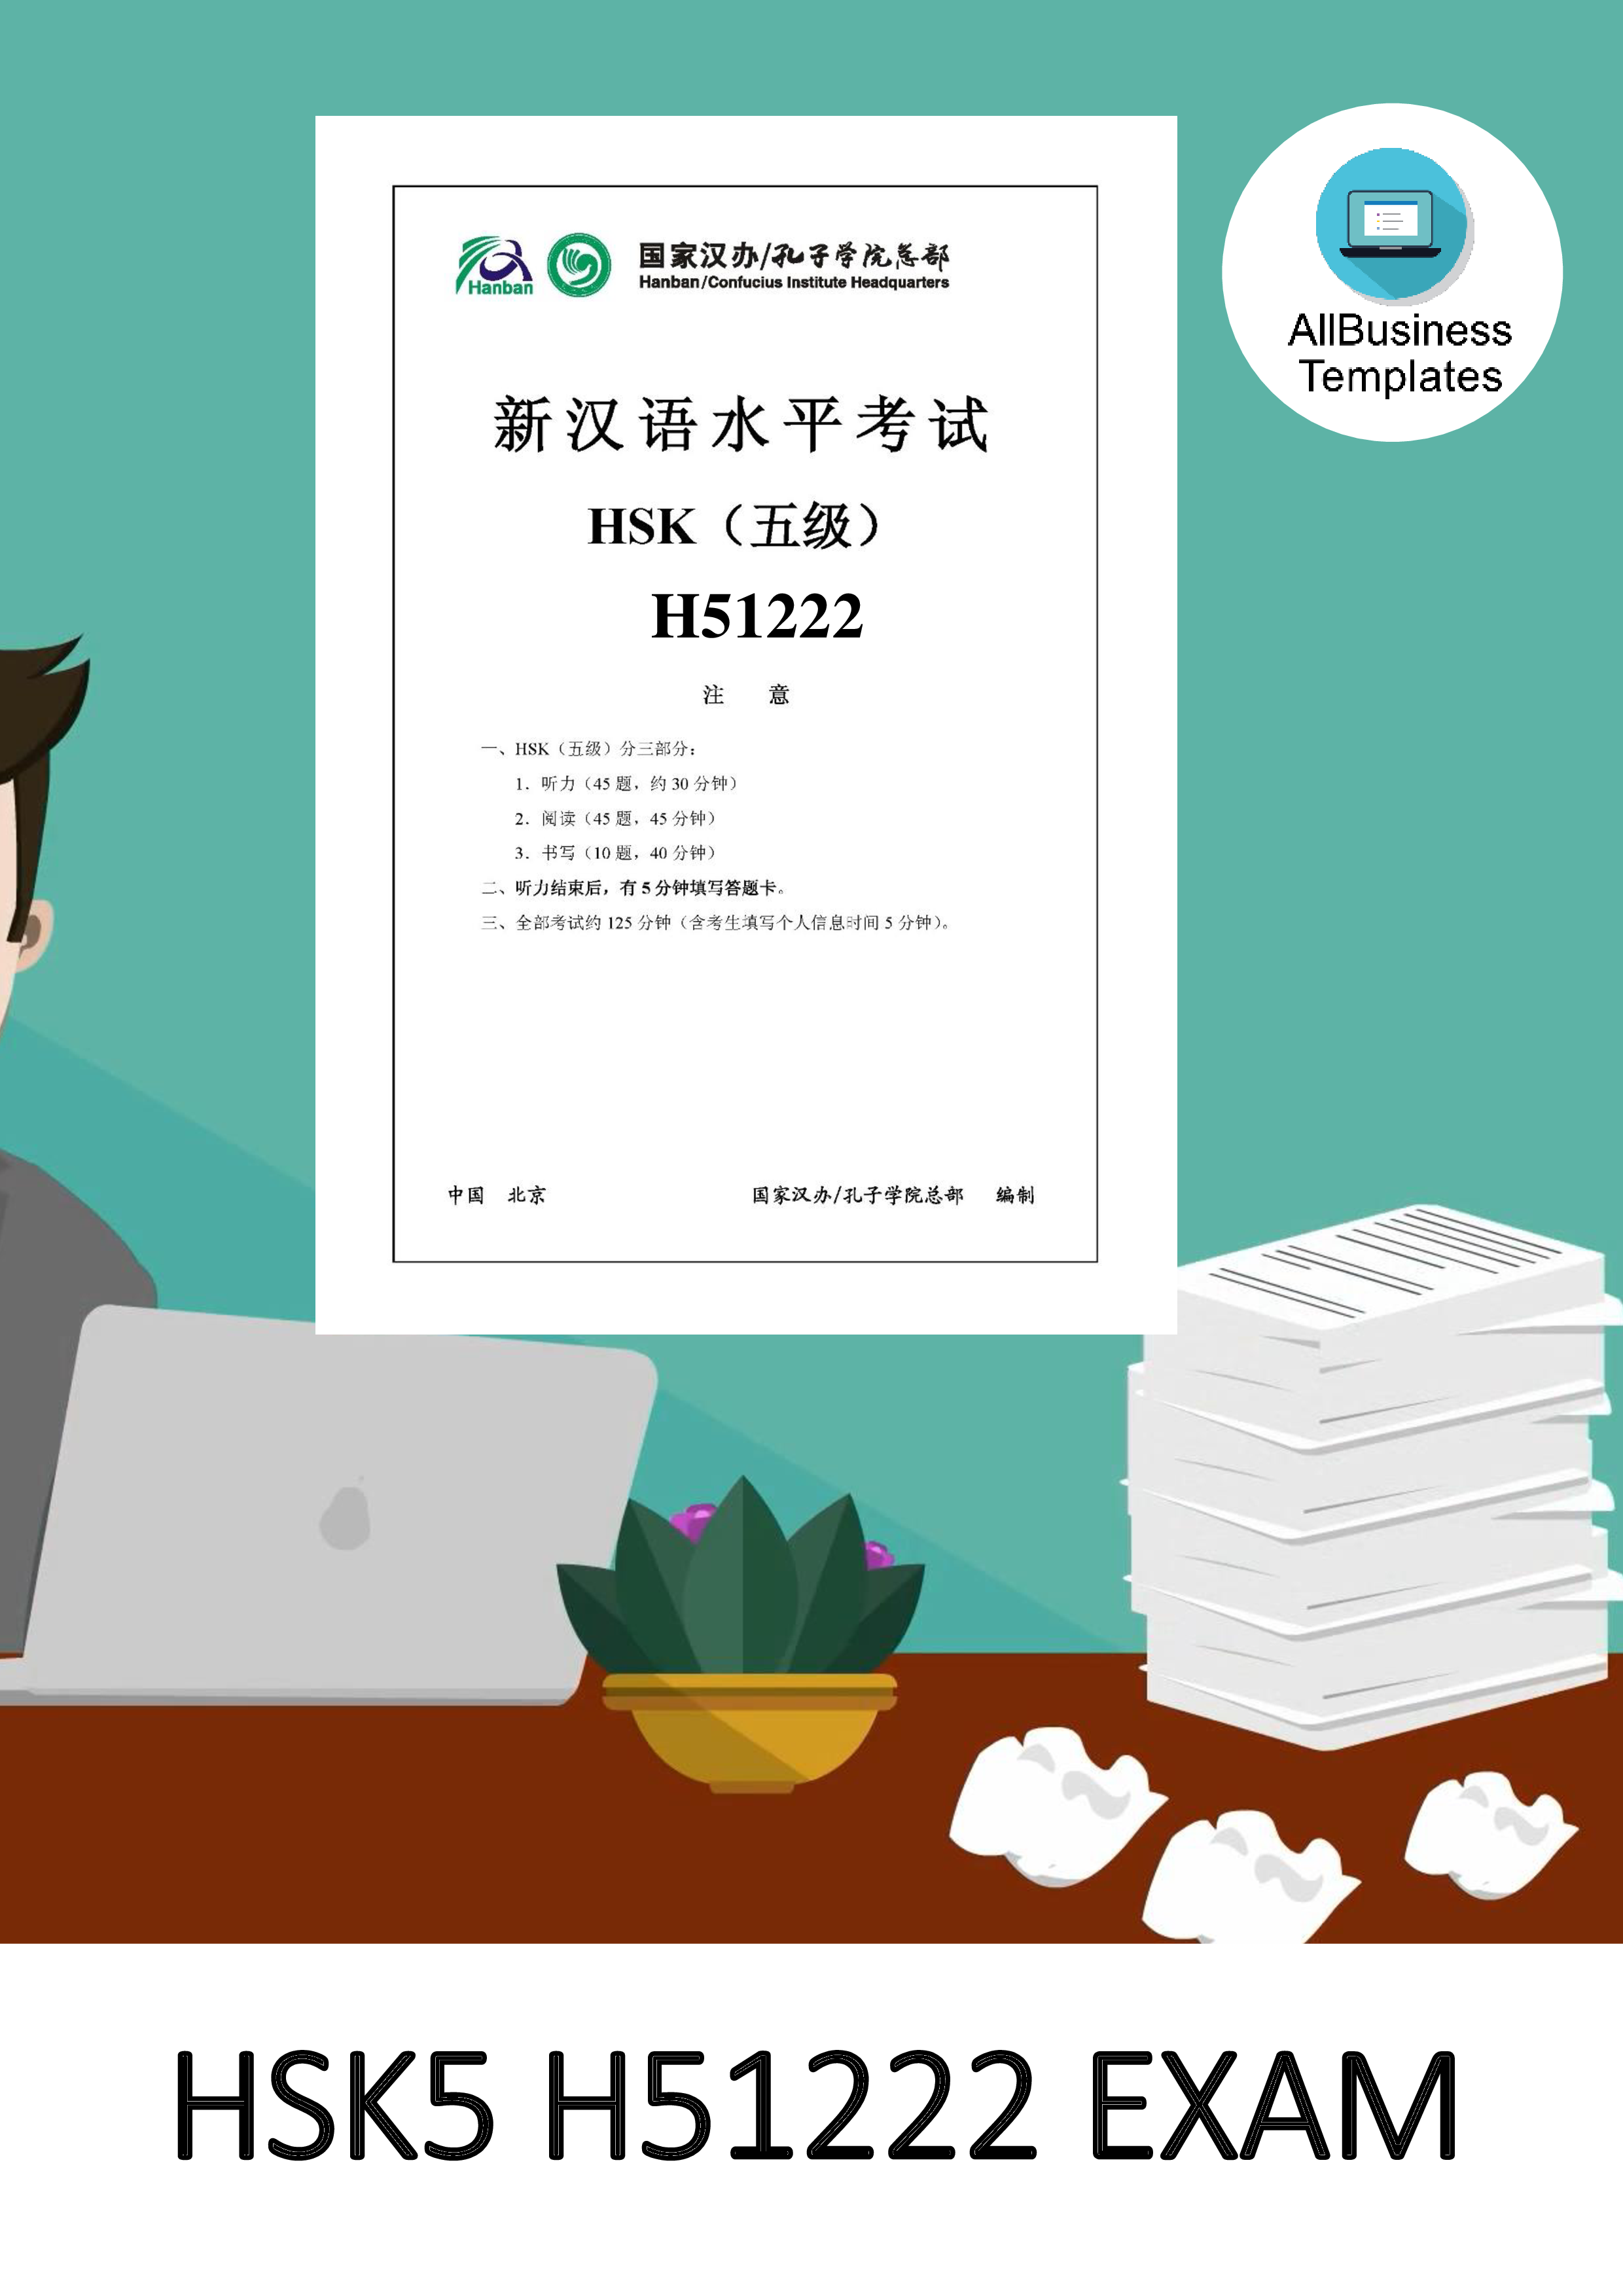 hsk5 h51222 official exam paper template